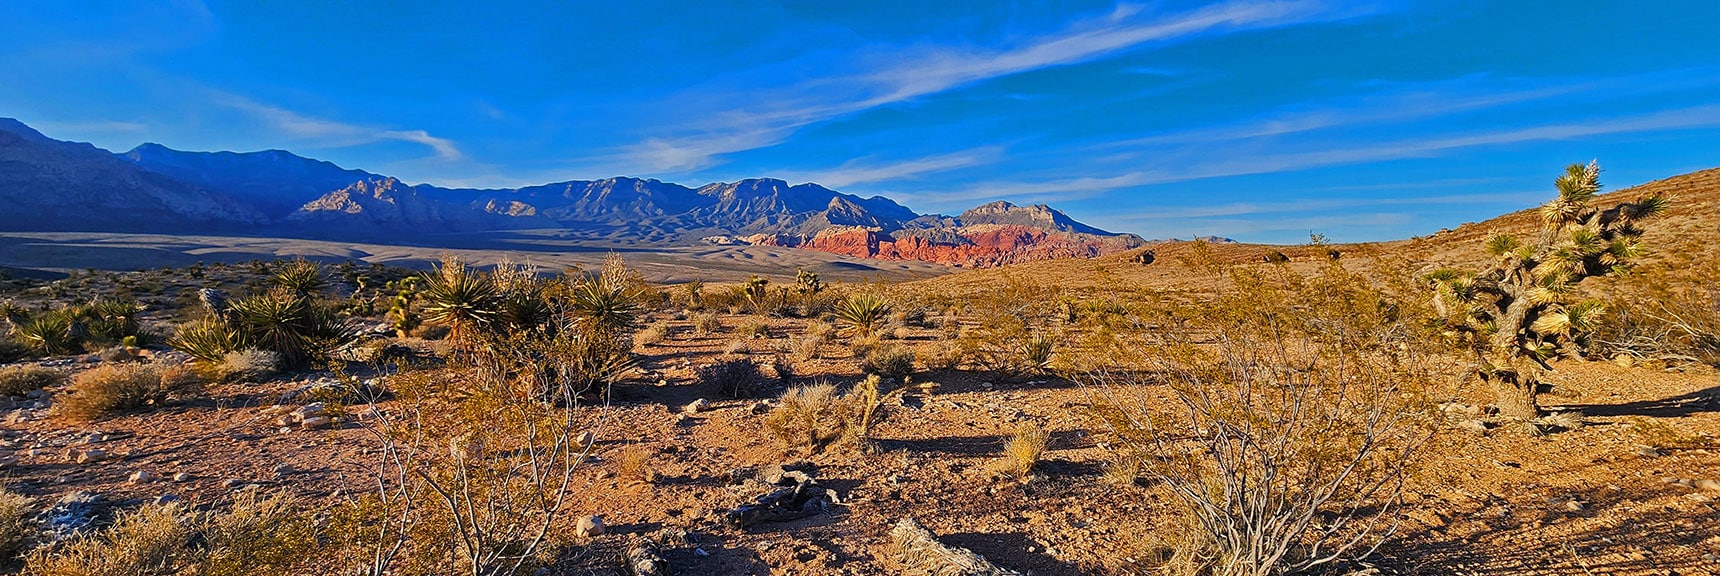 Sunset Lighting Up Red Rock Canyon, Calico Hills | Western Trails and Ridges | Blue Diamond Hill | Red Rock Canyon, Nevada